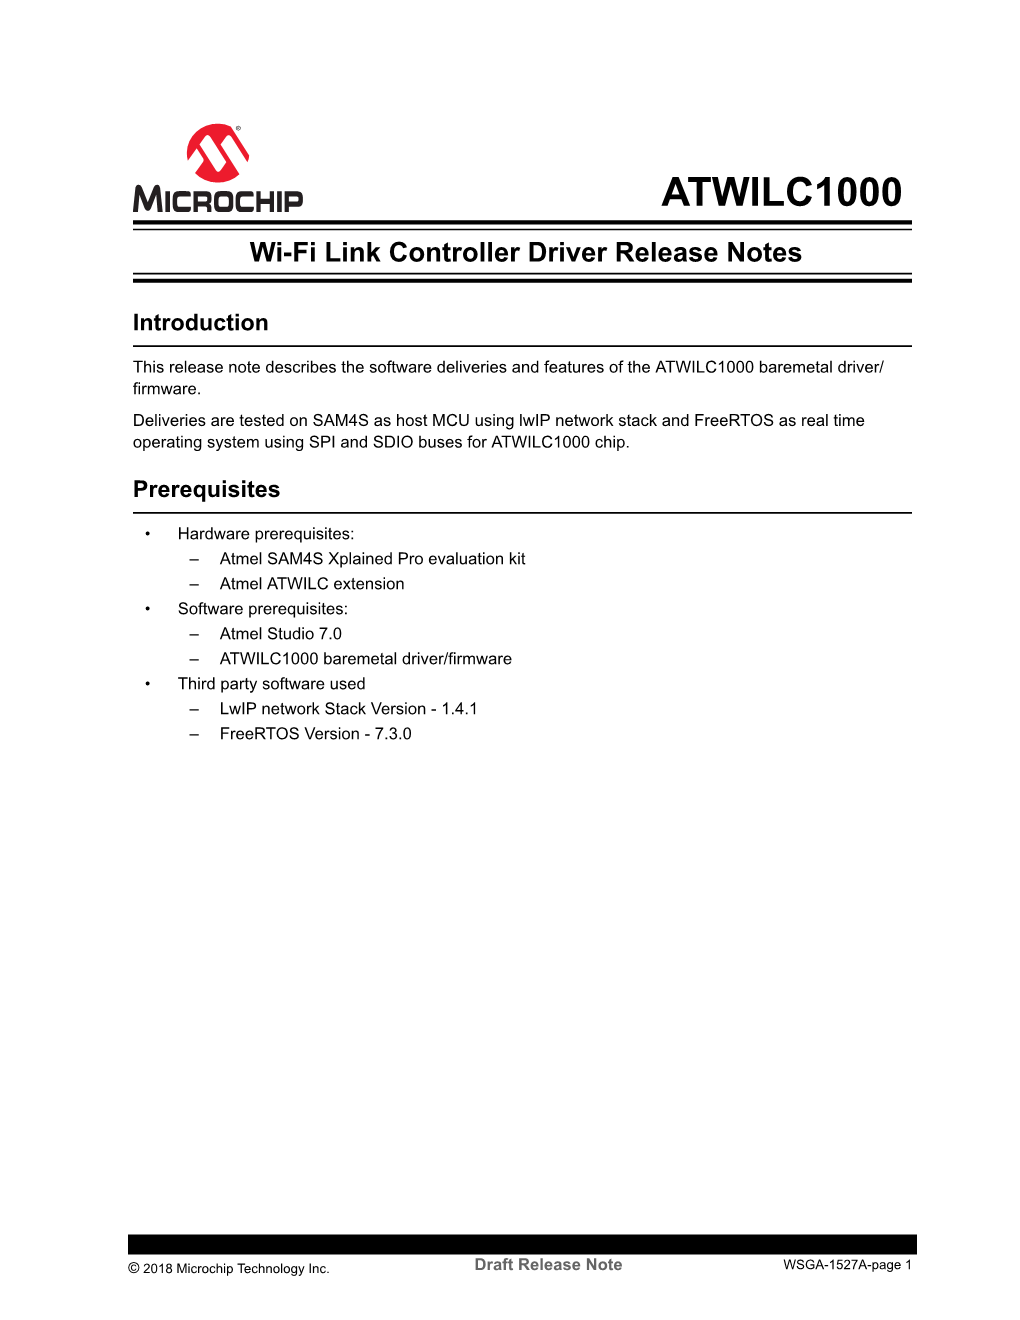 Wi-Fi Link Controller Driver Release Notes